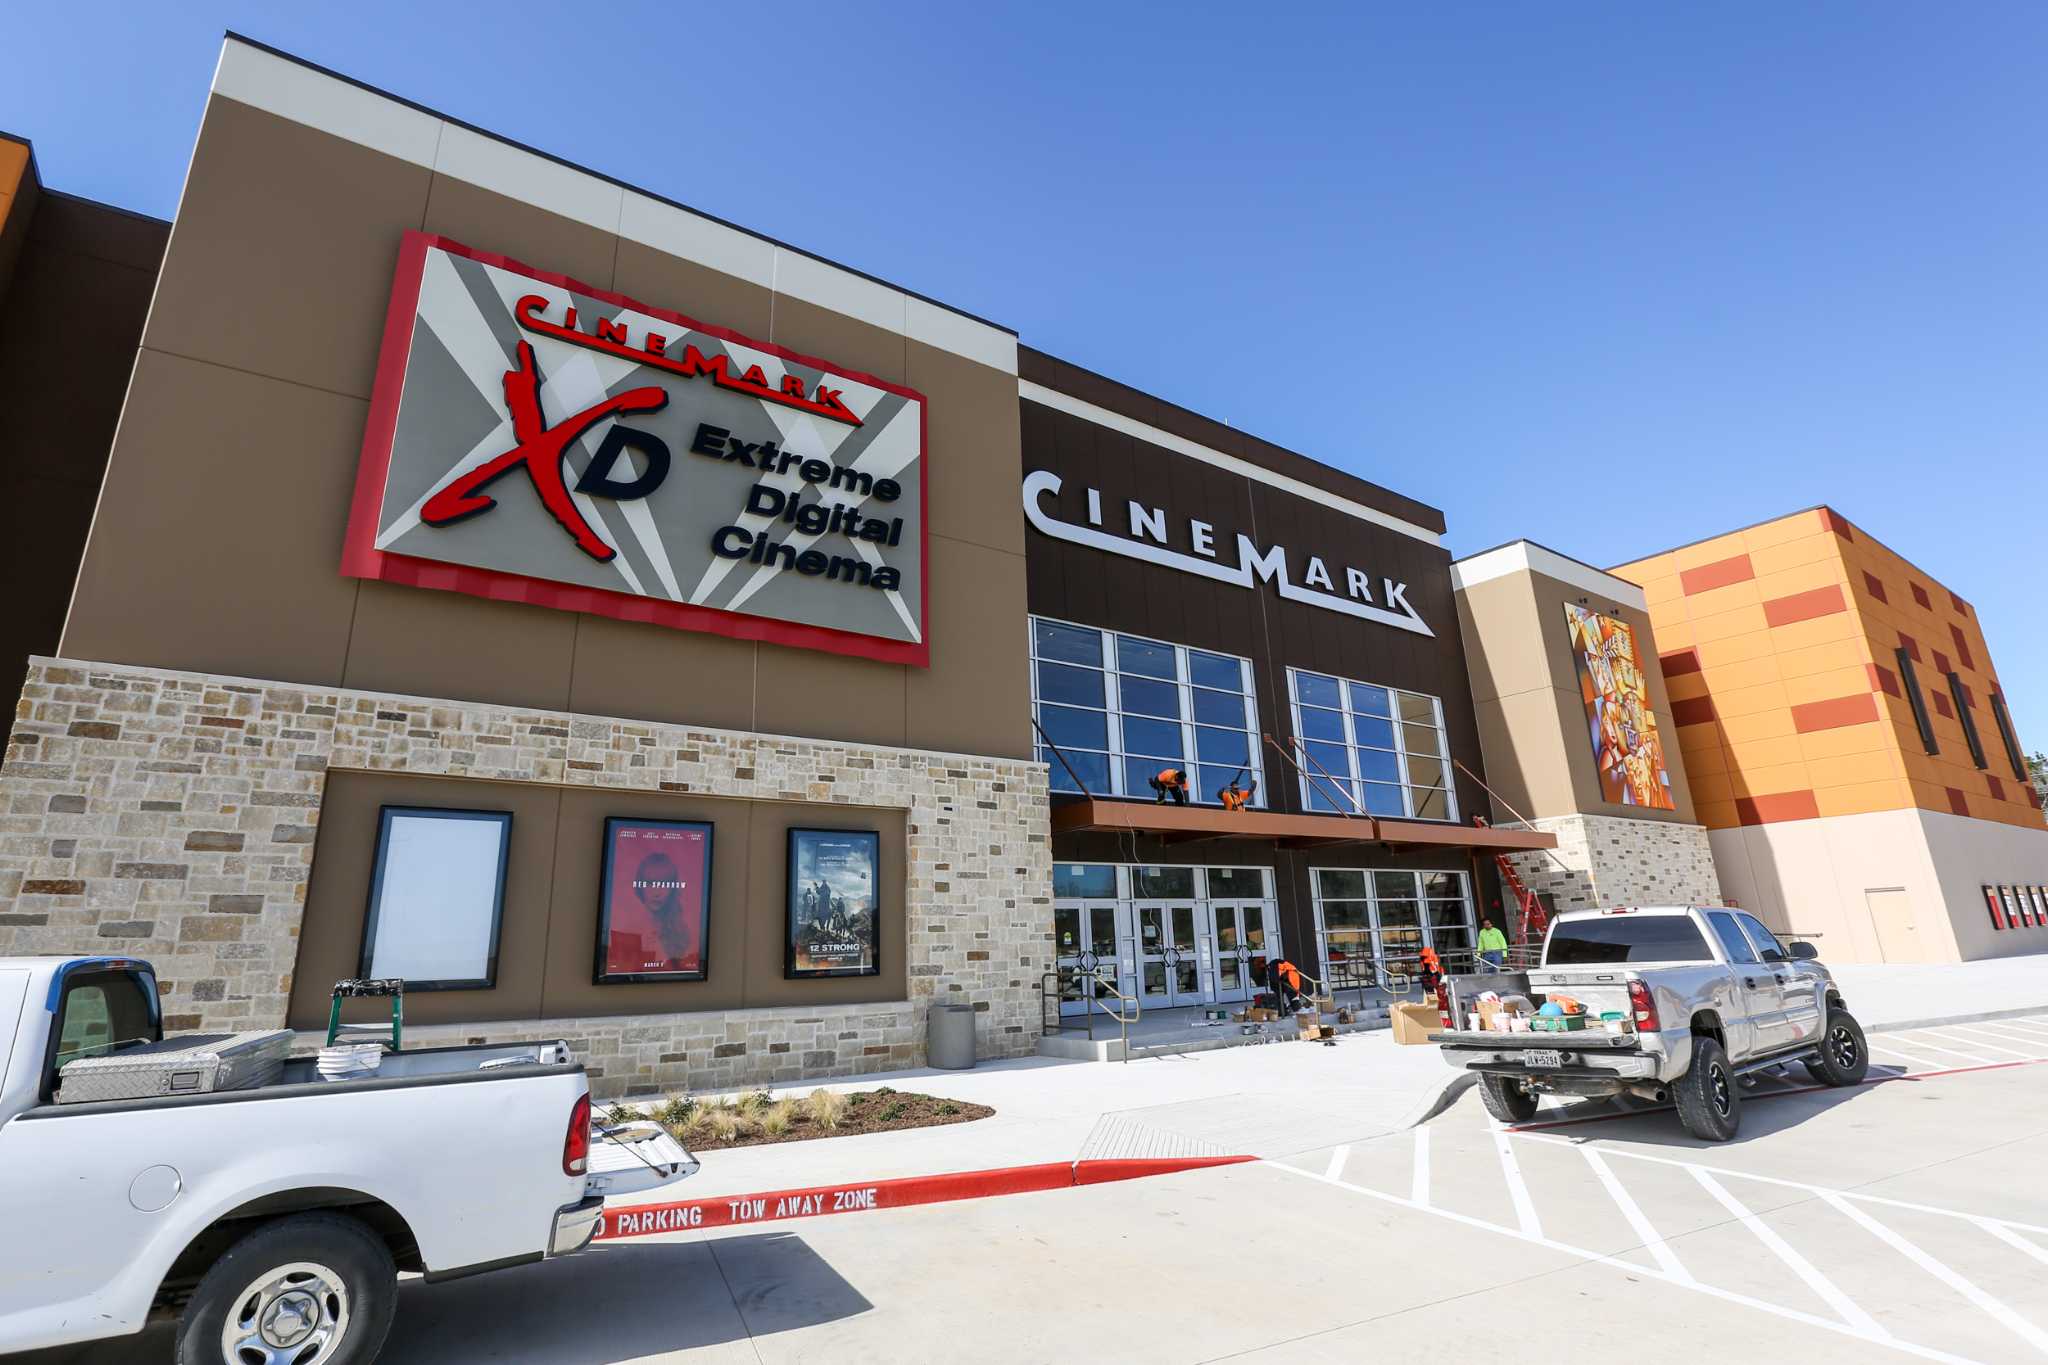 Cinemark to institute ban on large bags in movie theaters for 'safety